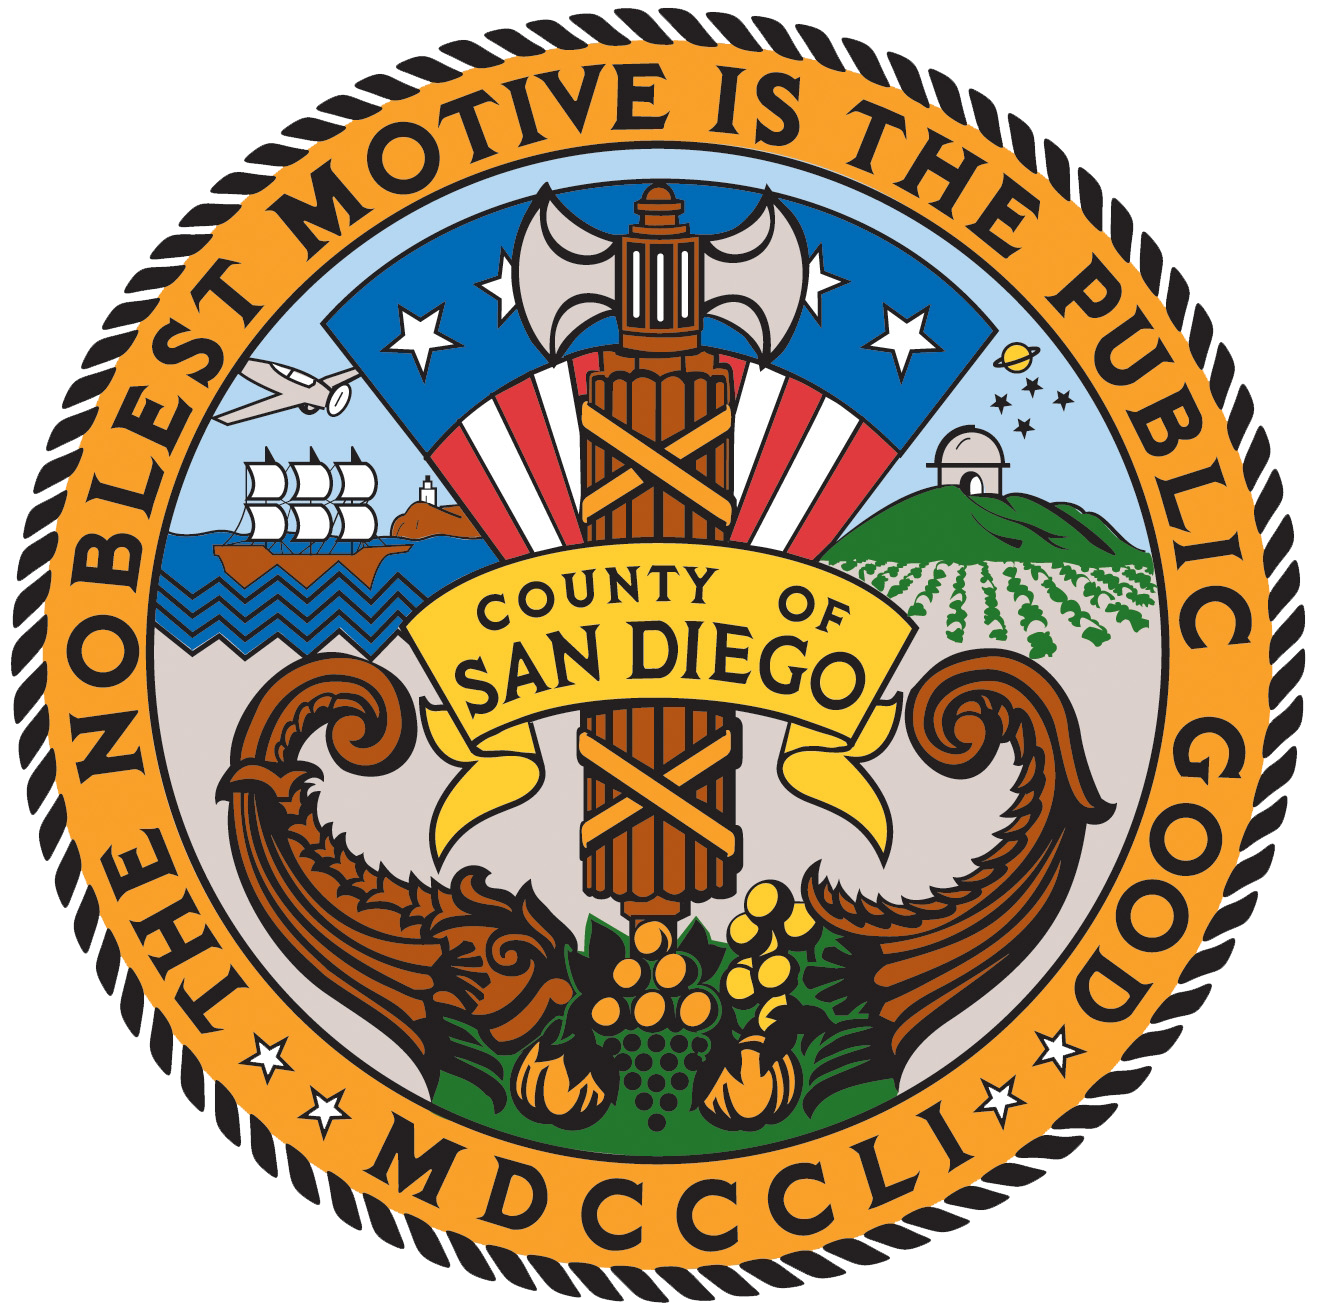 The County of San Diego